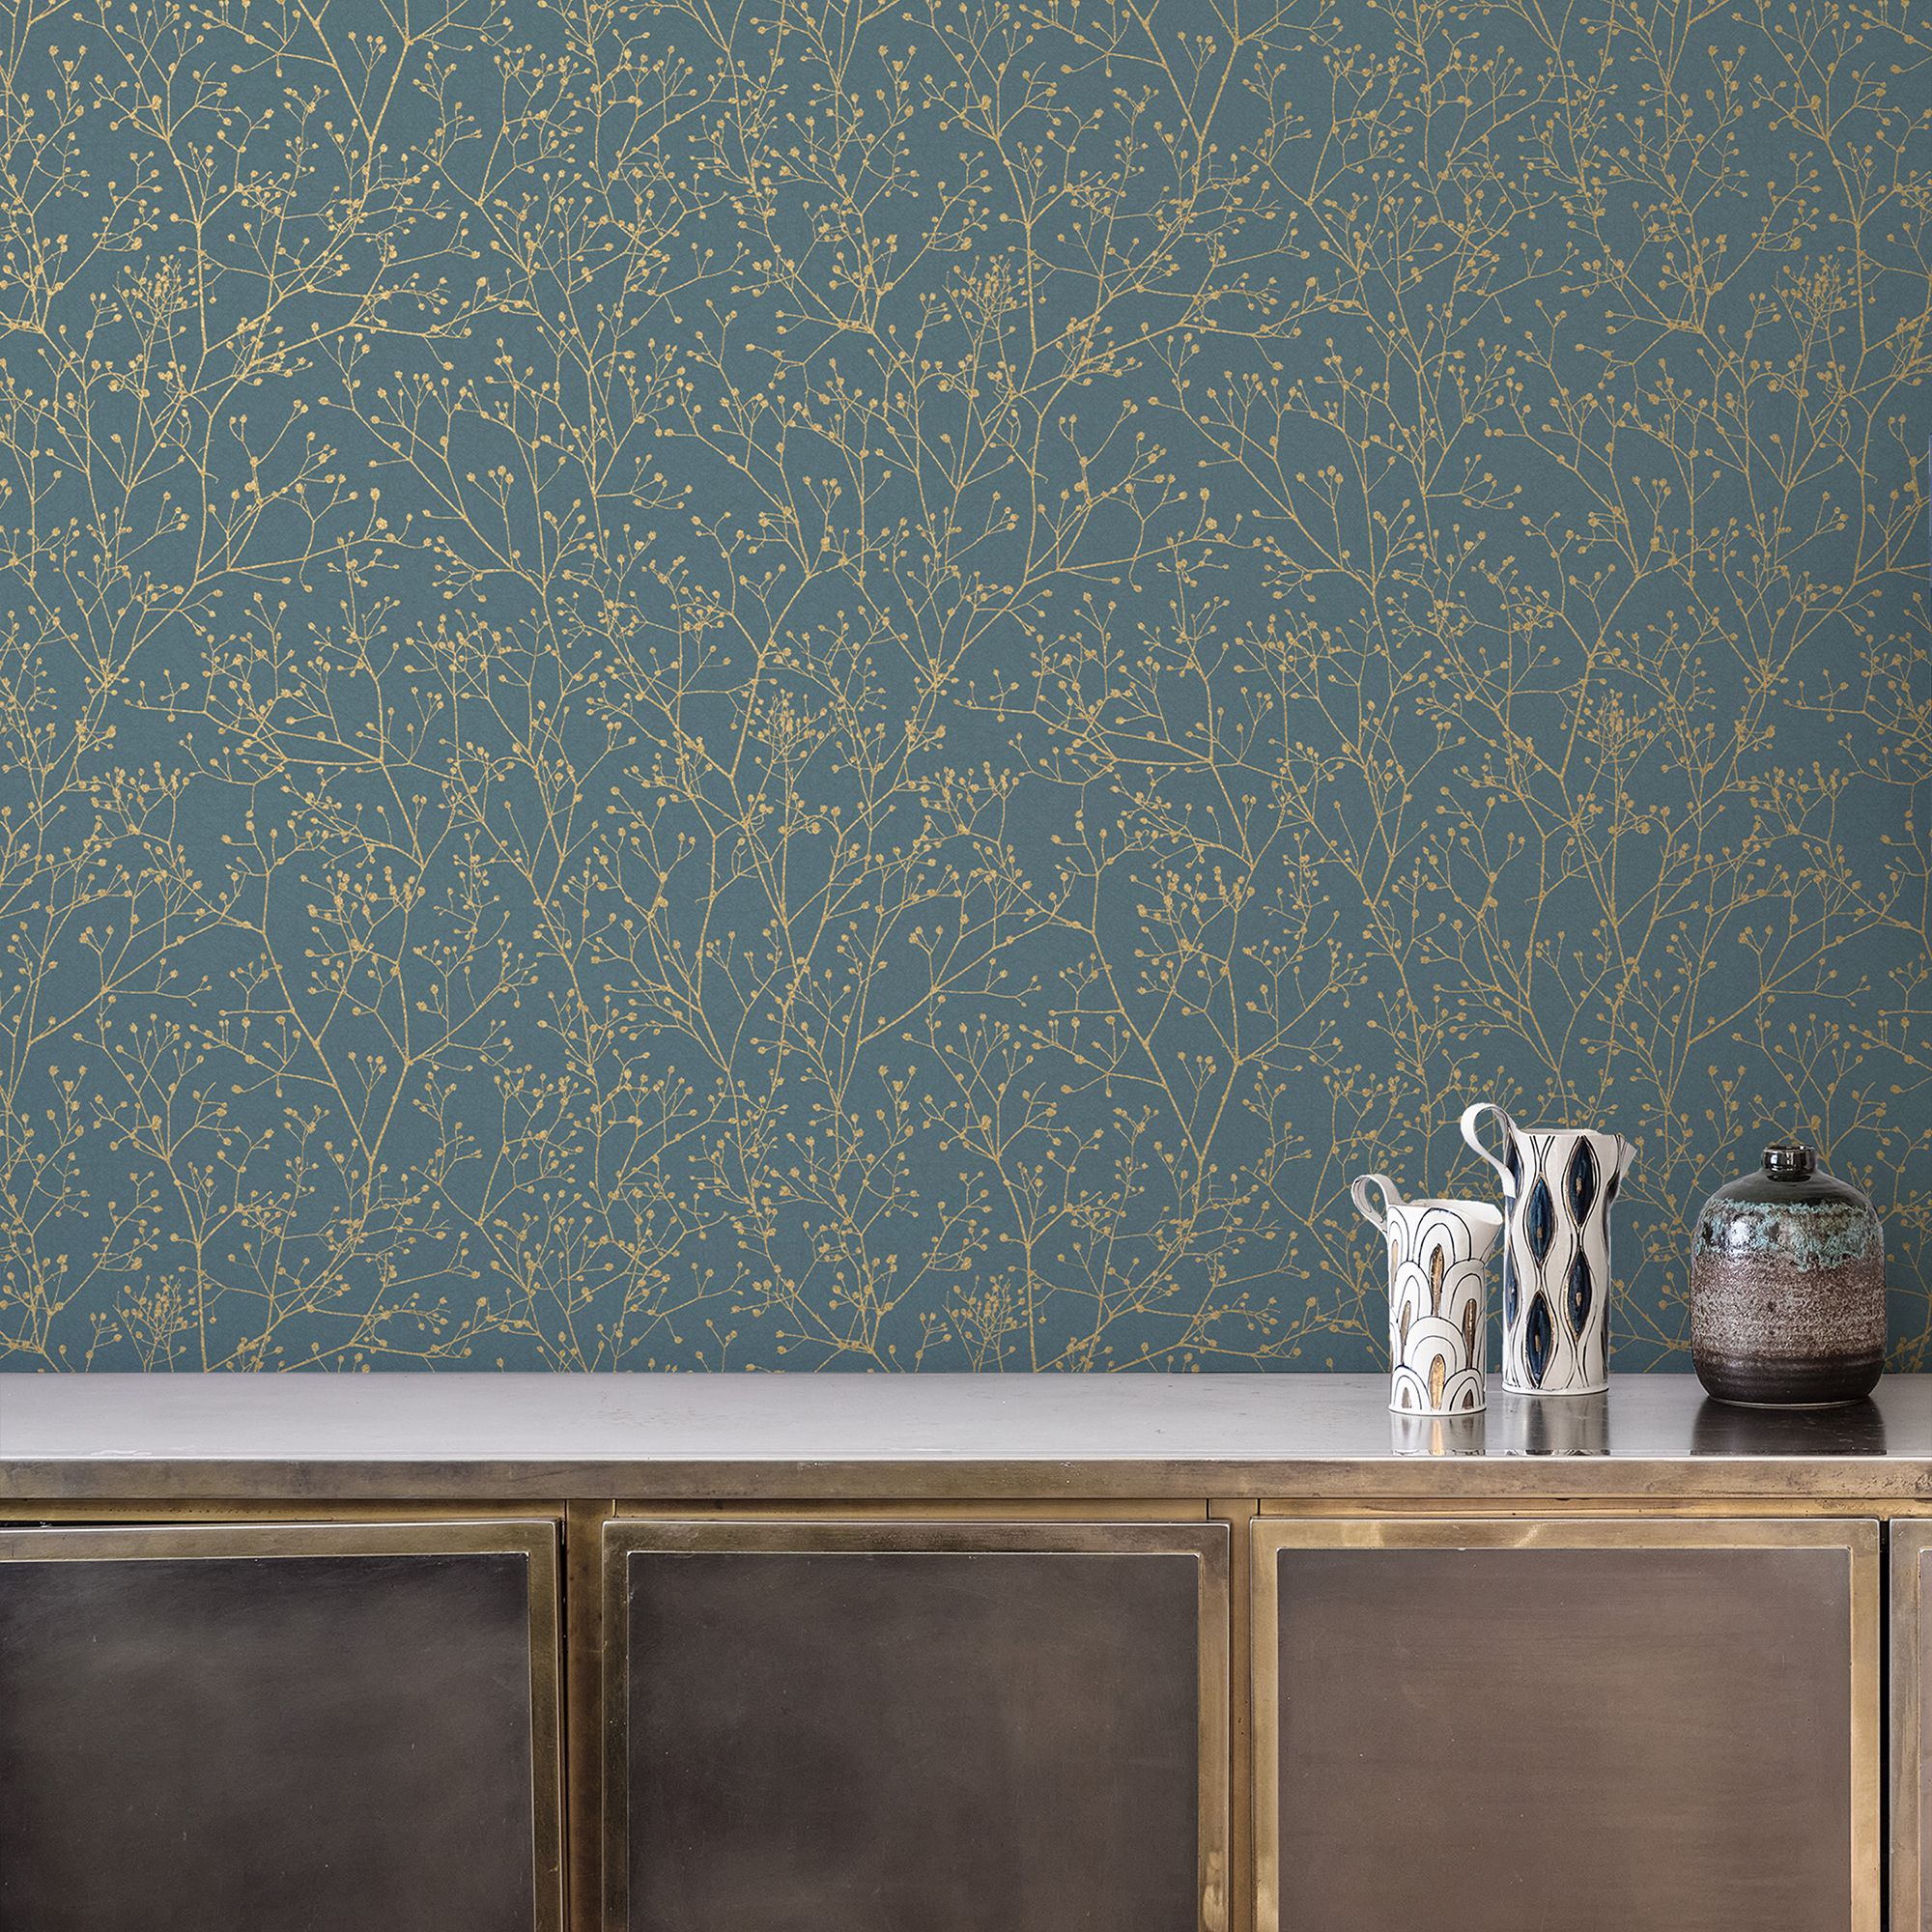 Clarissa Hulse Gypsophila Airforce Blue & Gold effect Smooth Wallpaper